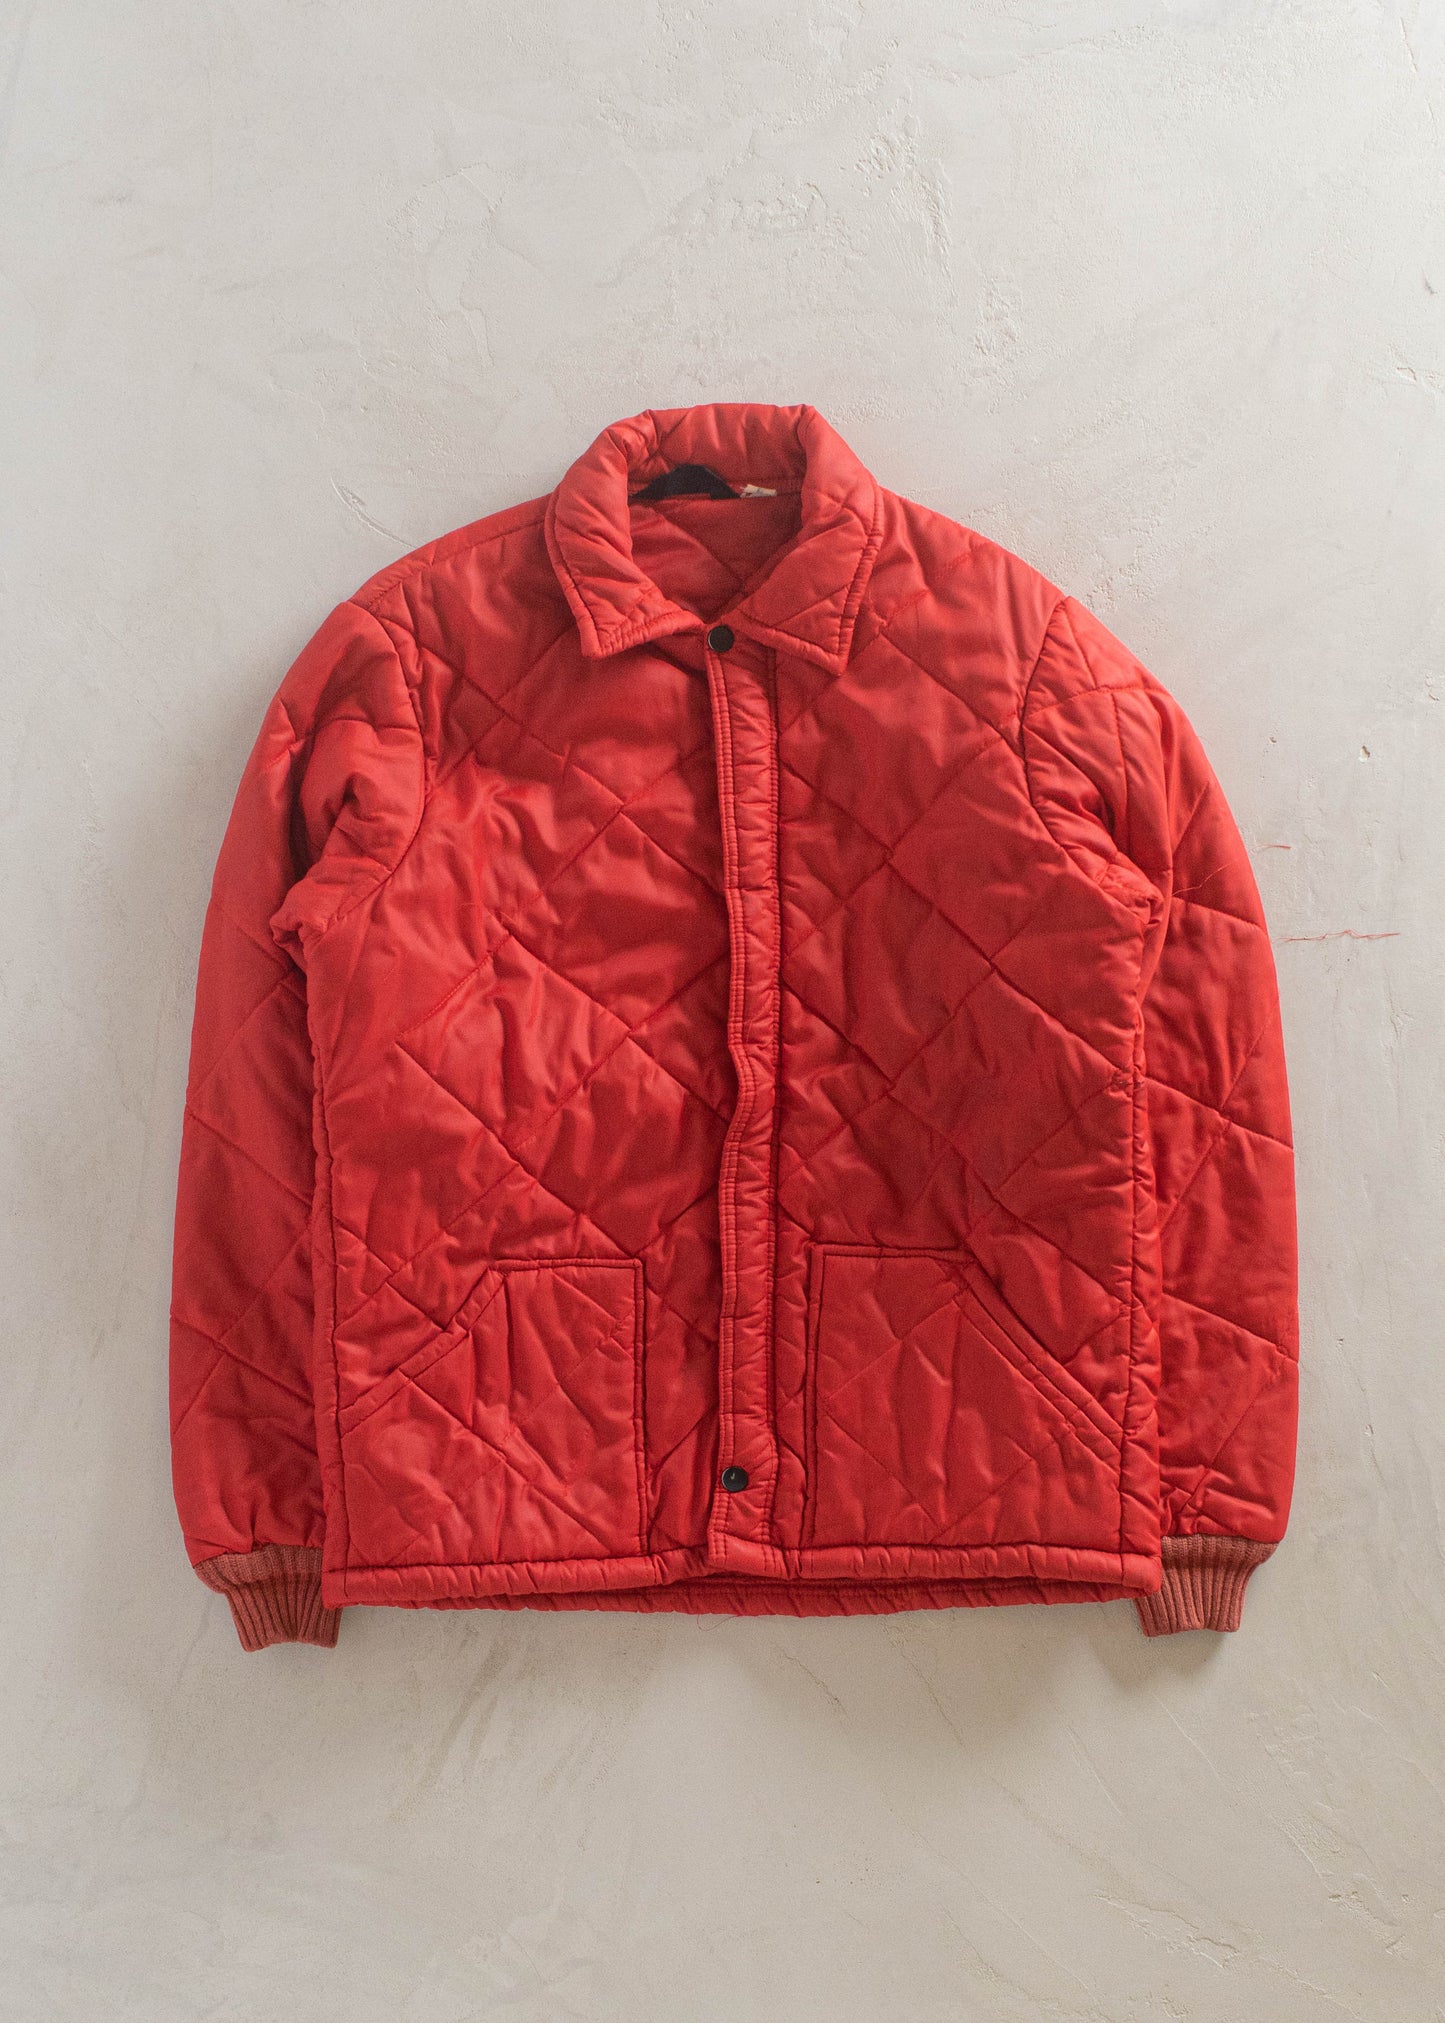 1980s Big Smith Quilted Liner Jacket Size XS/S